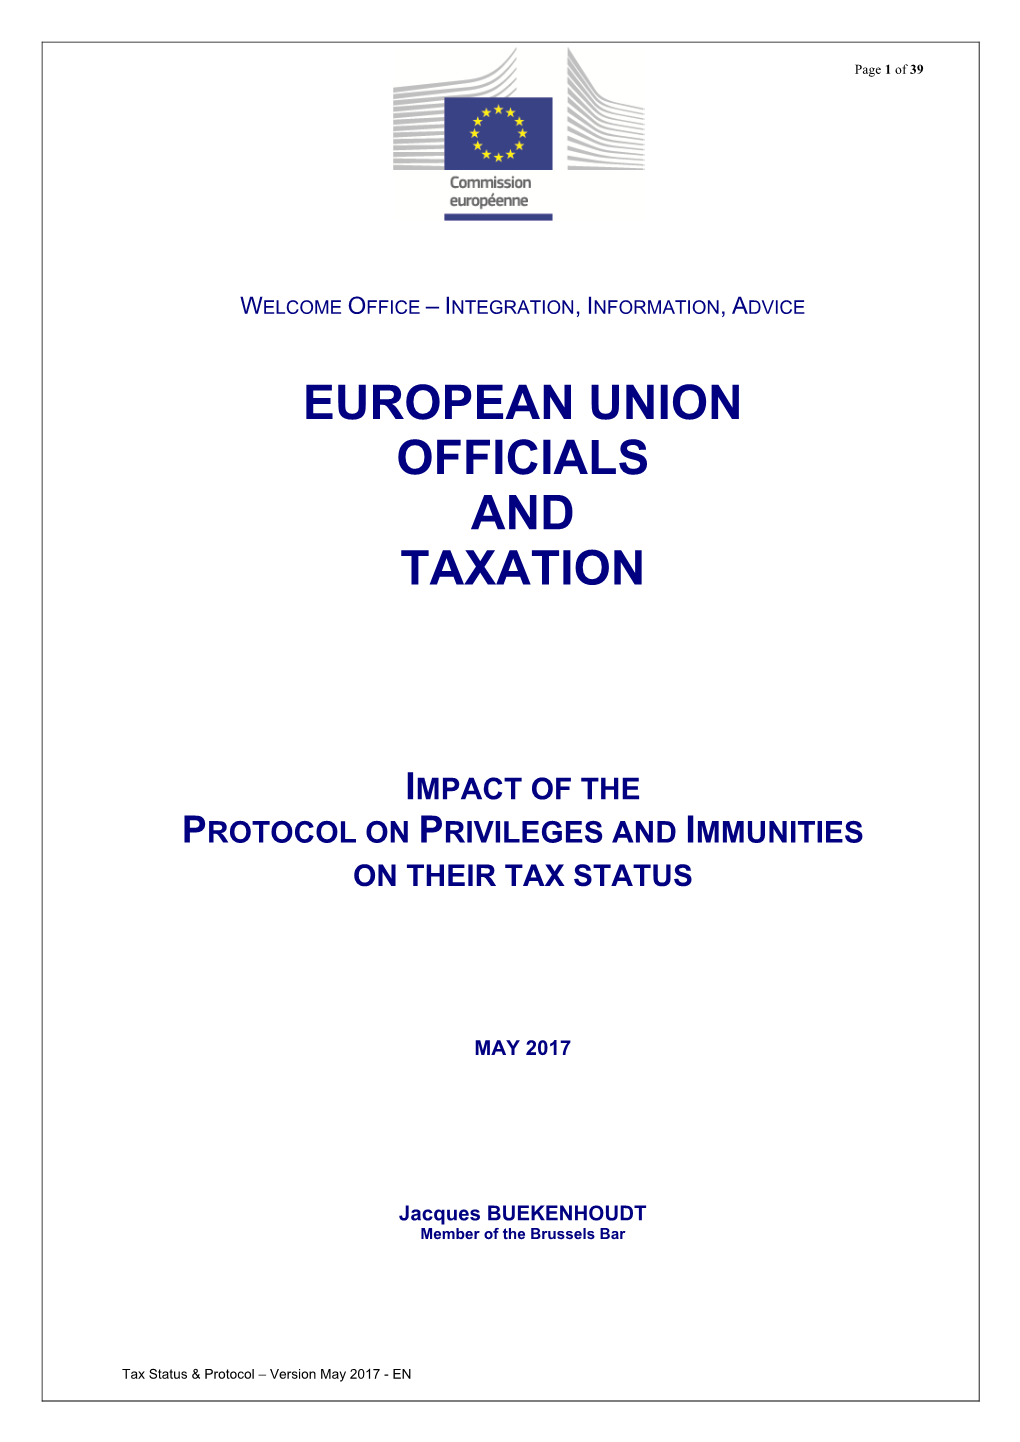 European Union Officials and Taxation